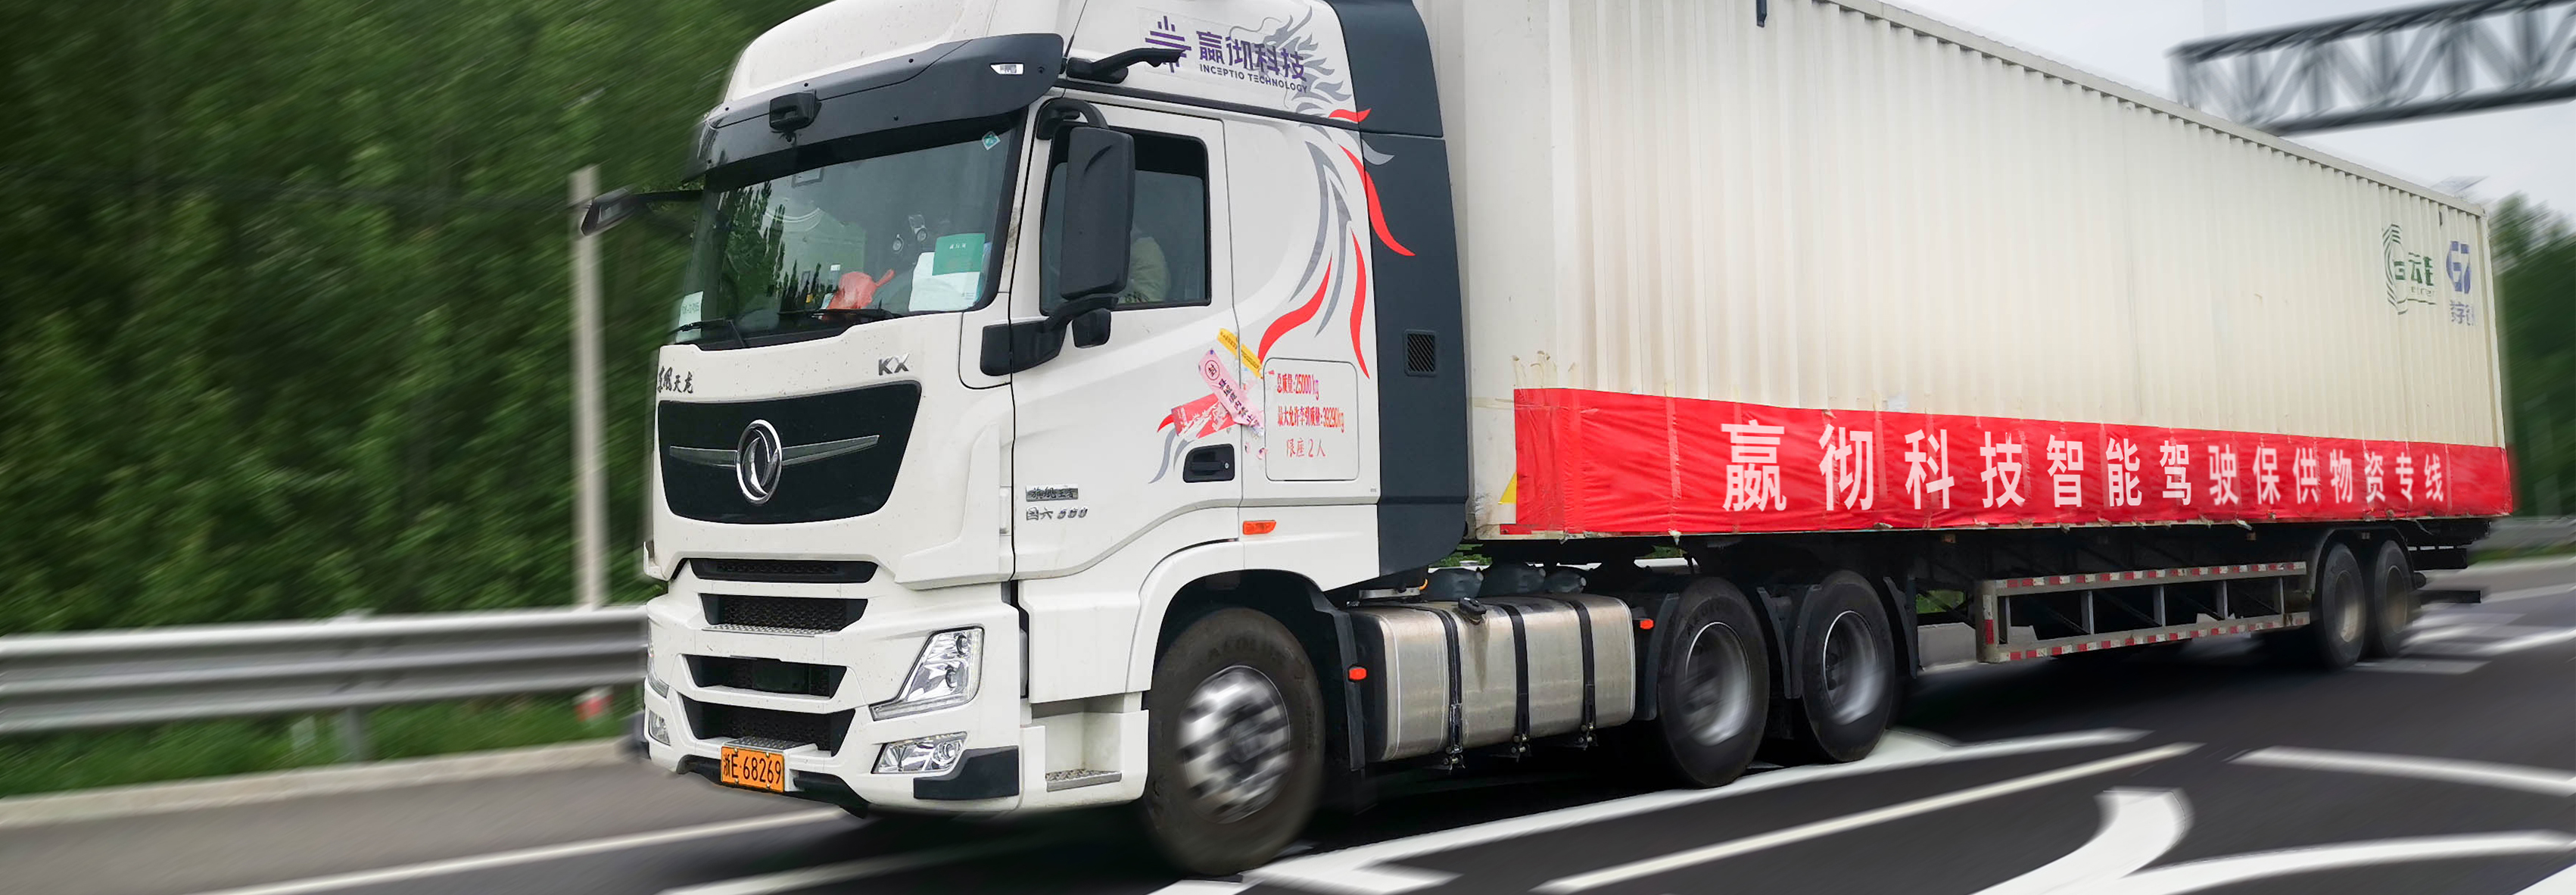 The autonomous trucks from Inceptio Technology achieved over 2 million kilometers of commercial operations